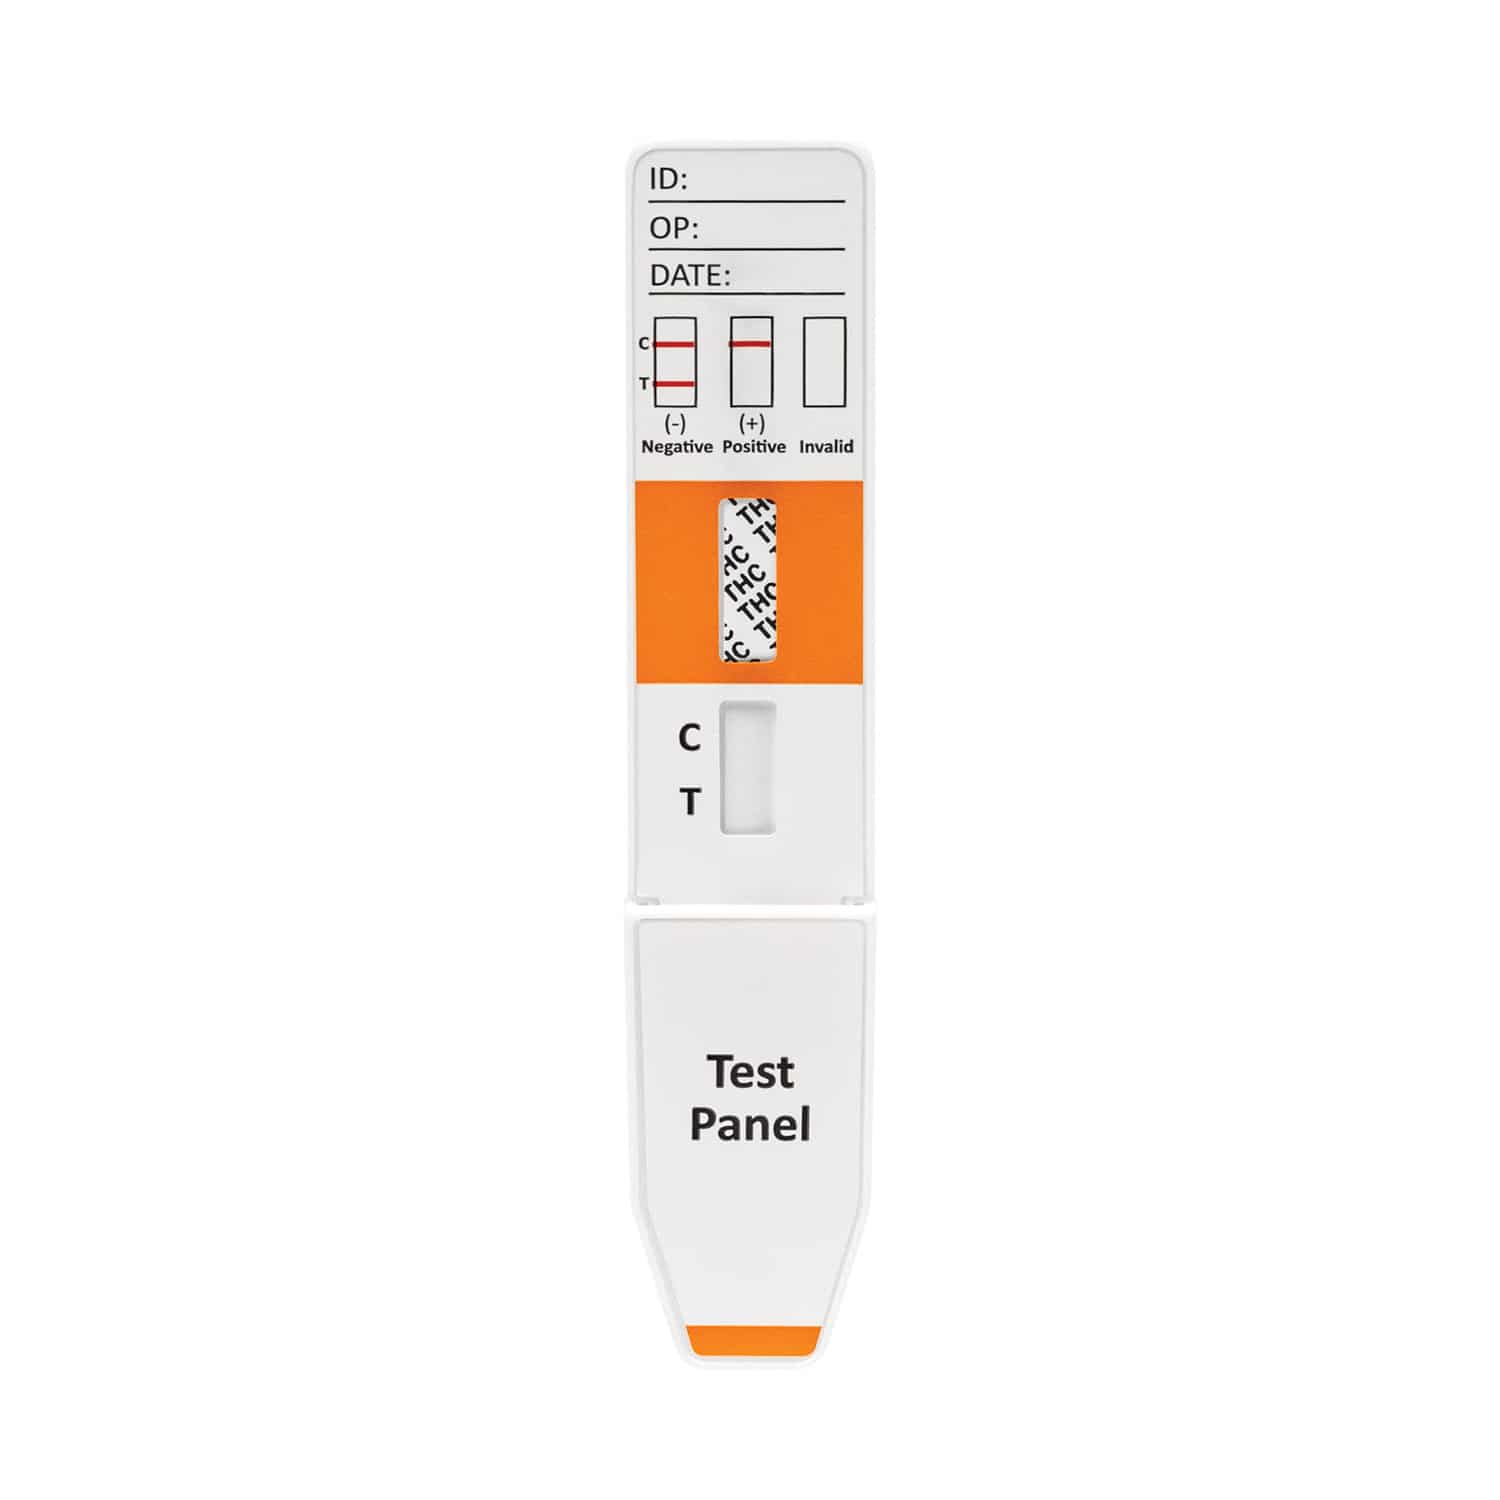 Surestep™ Powder Test Drug Screen Panel (Coc) (Image Differs From Product)